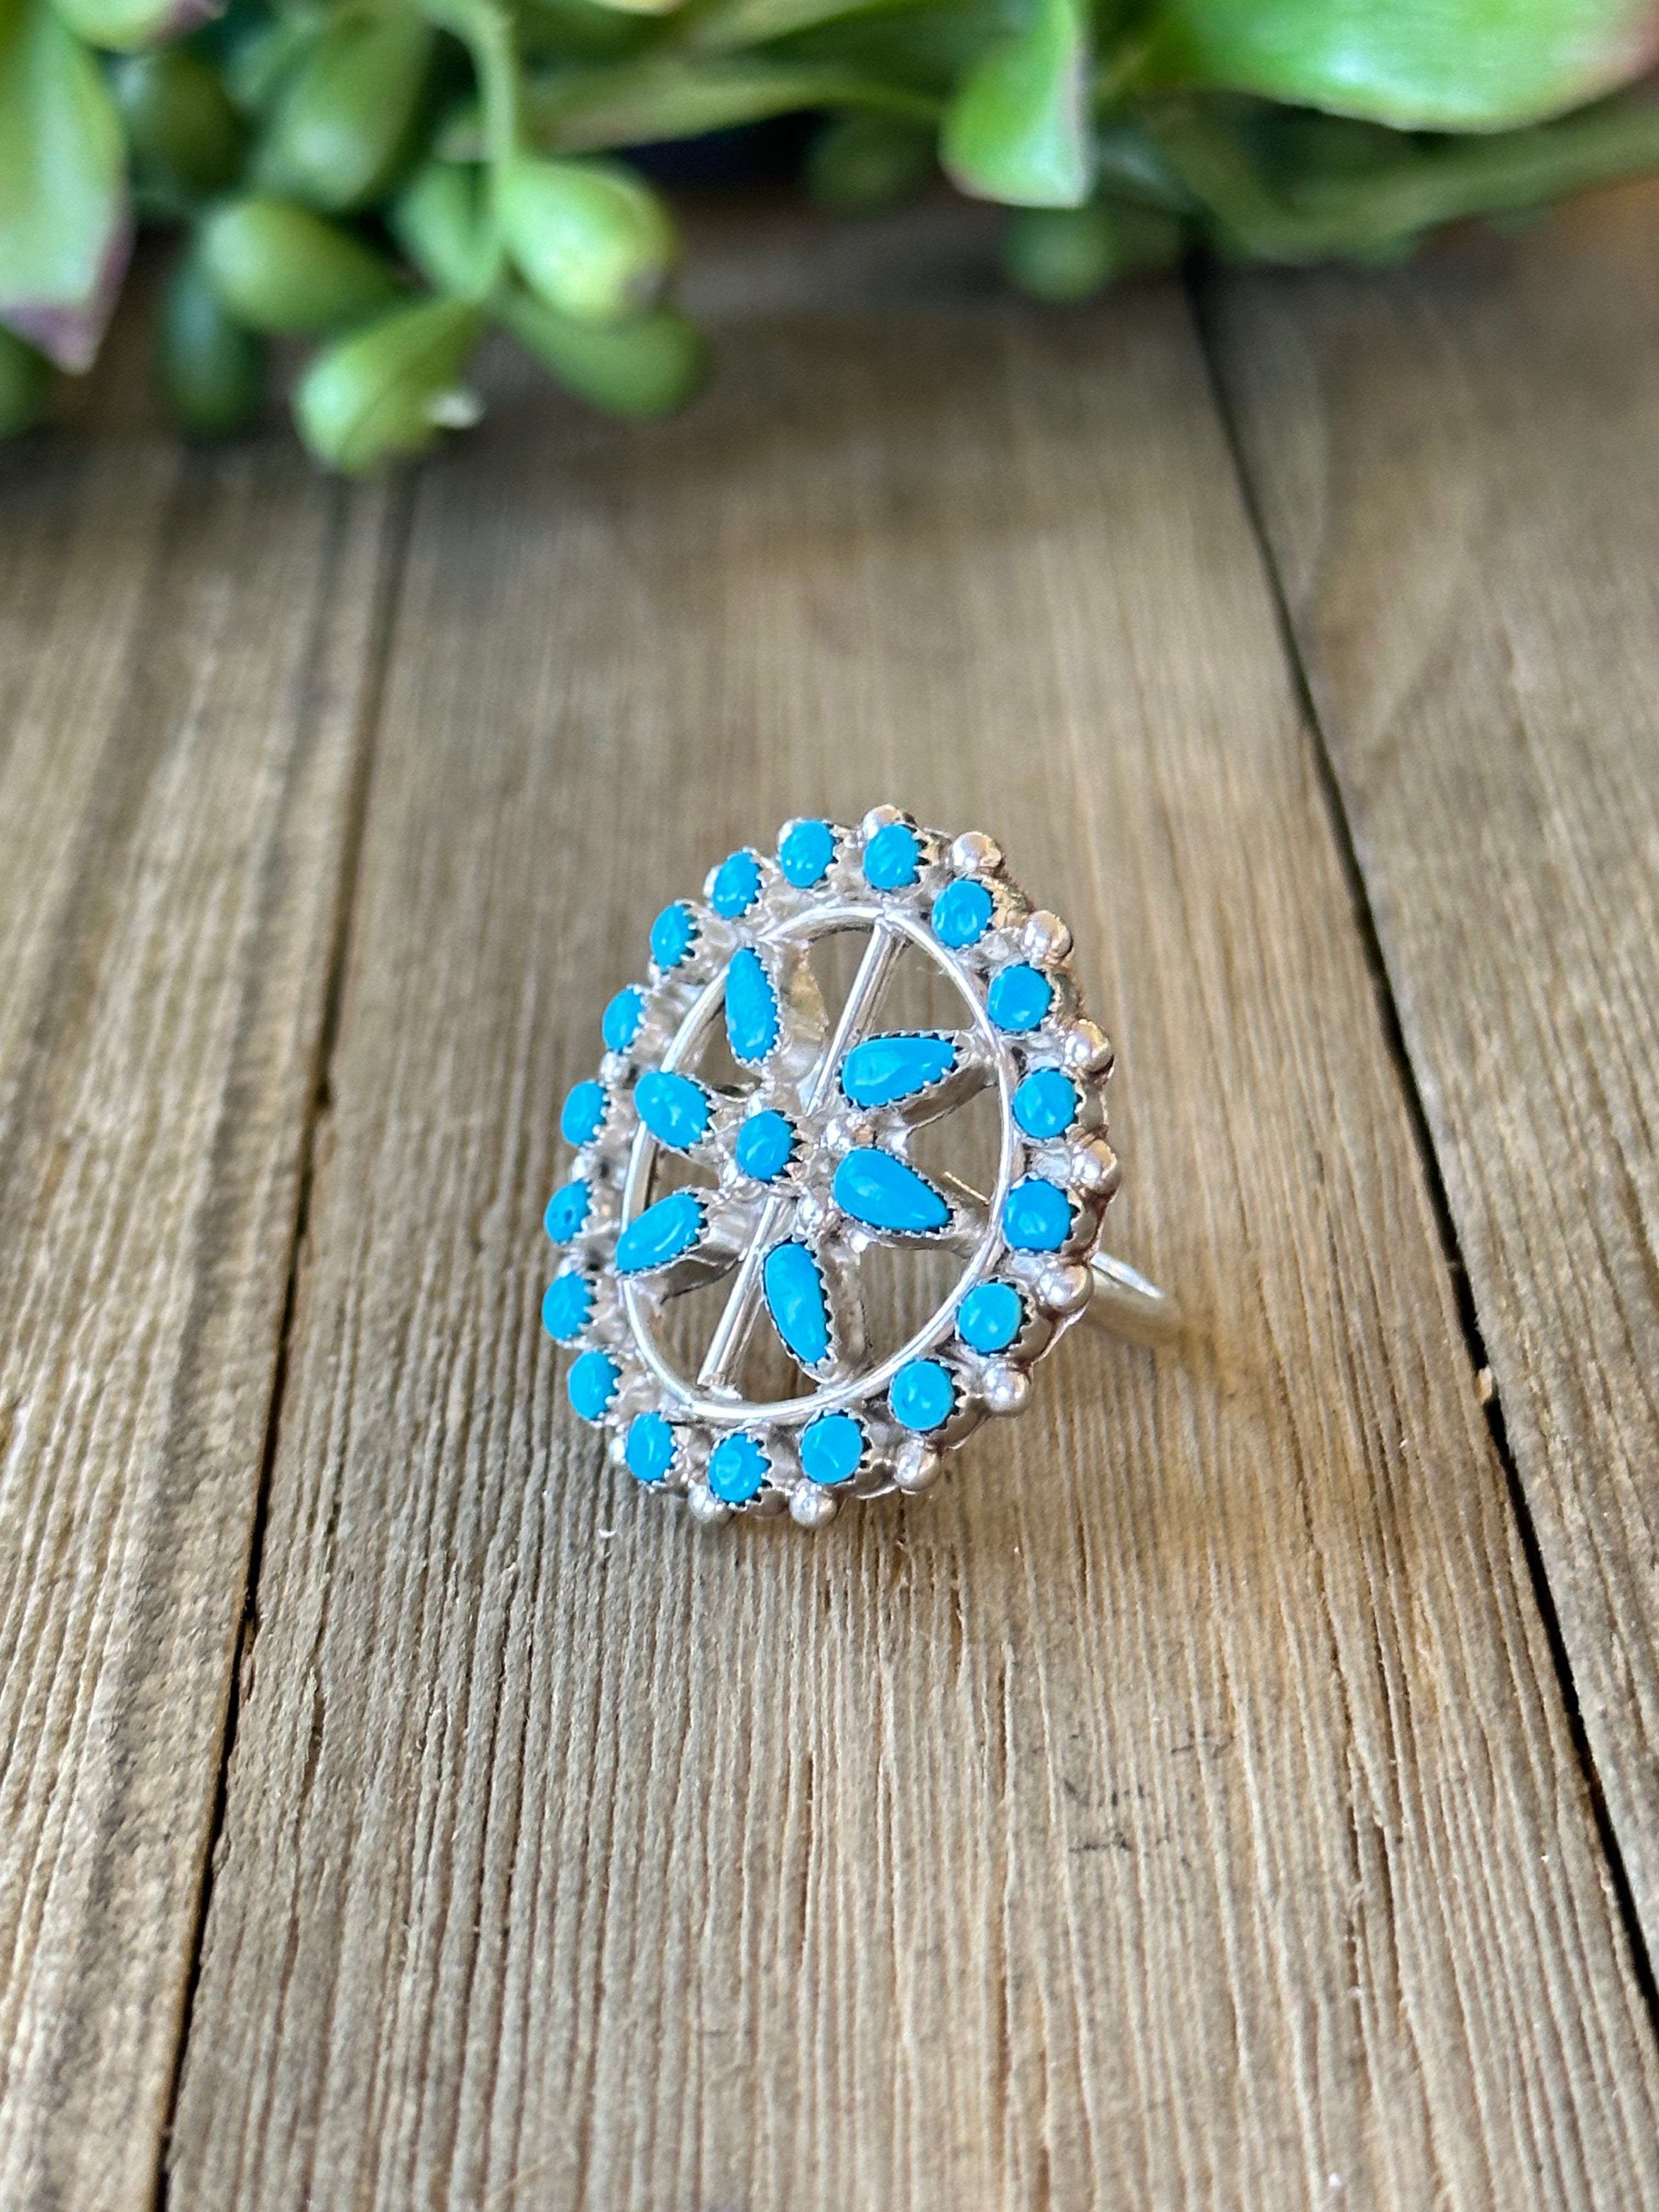 Zuni Made Turquoise Ring & Sterling Silver Ring Size 7.75